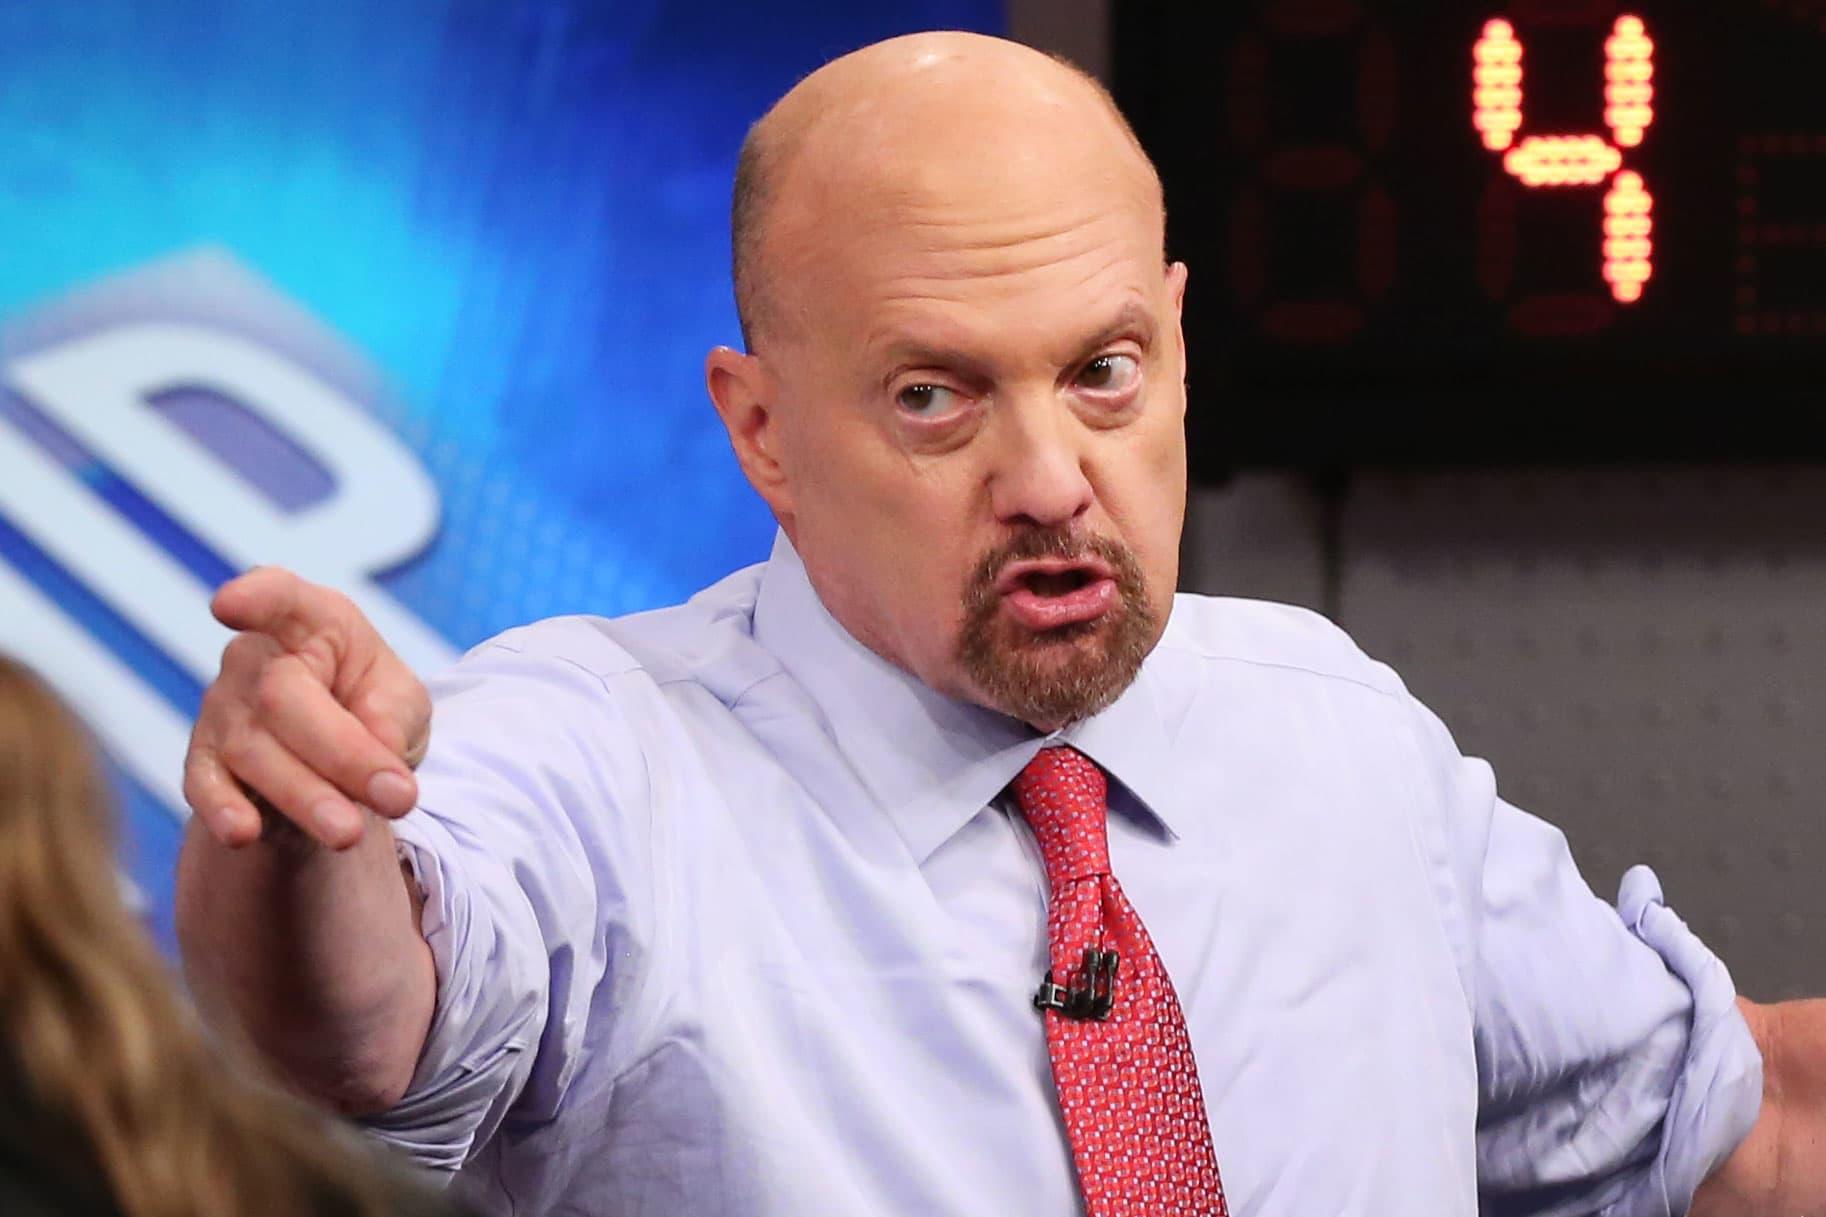 Cramer lists 5 stocks to consider during “any bout of weakness.”